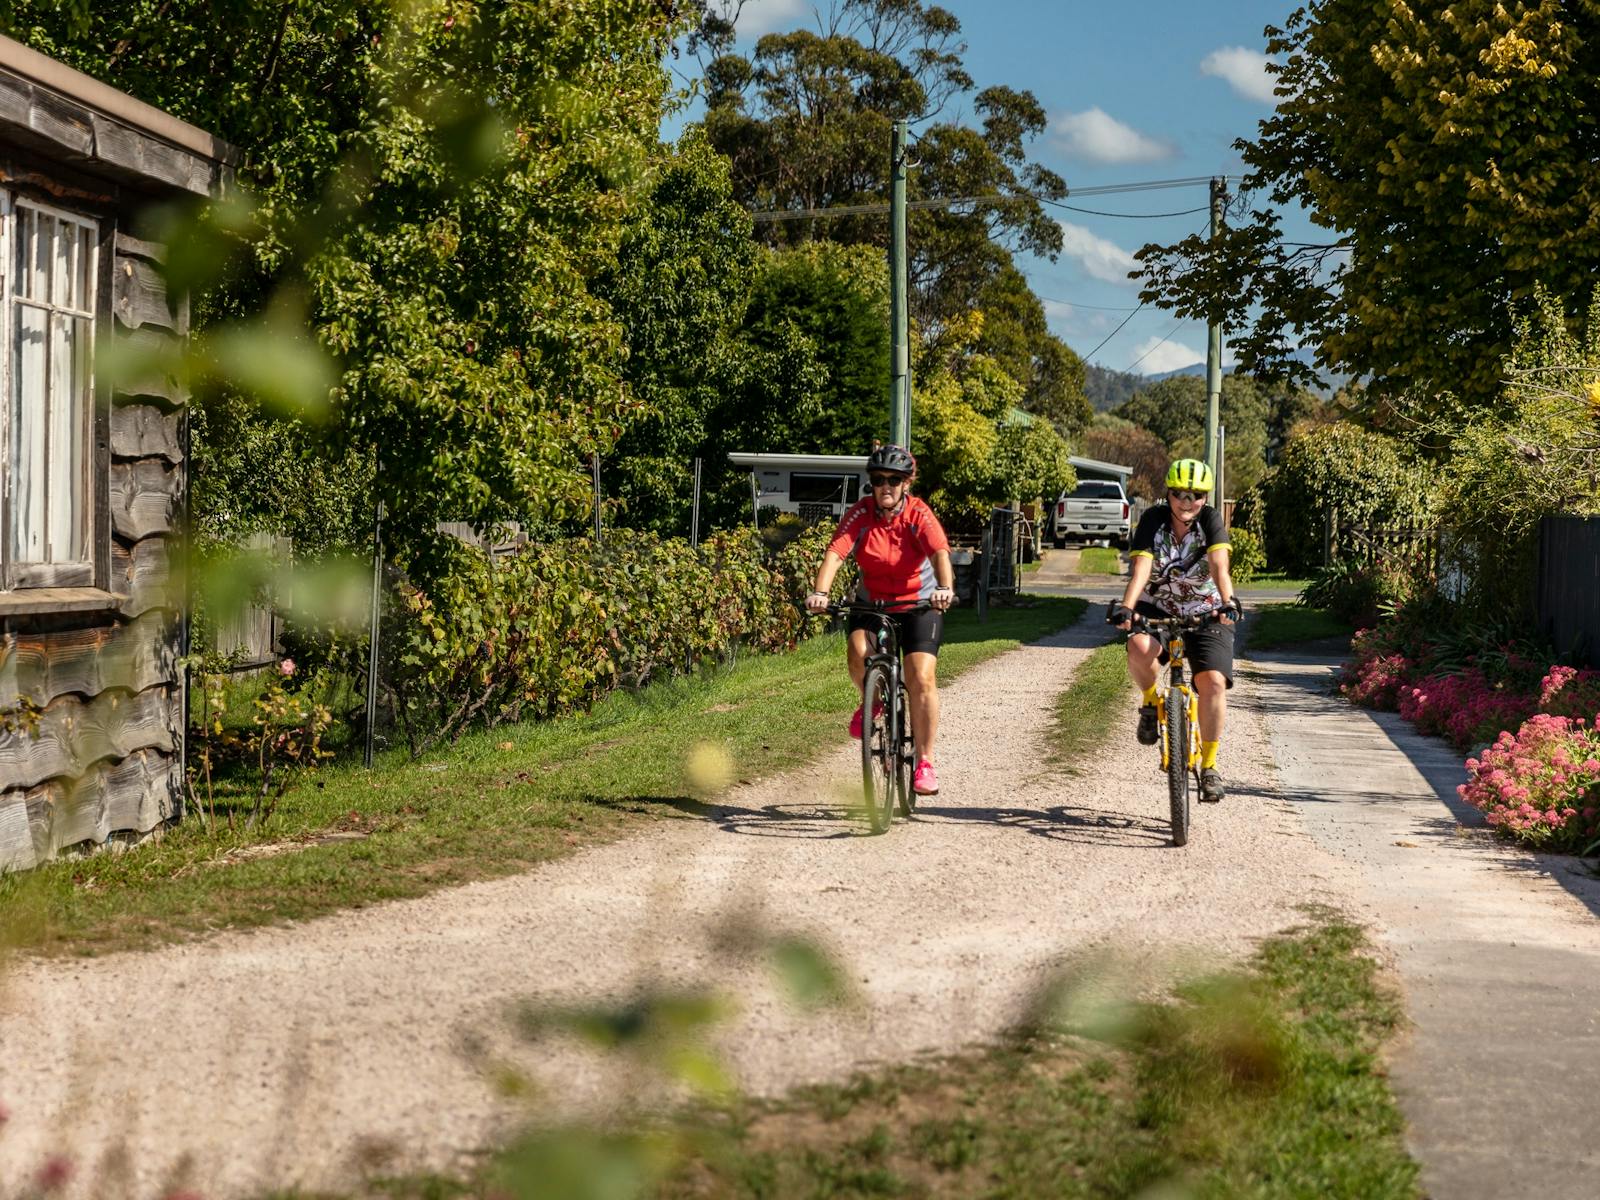 Two women on mountain bikes riding up the driveway.